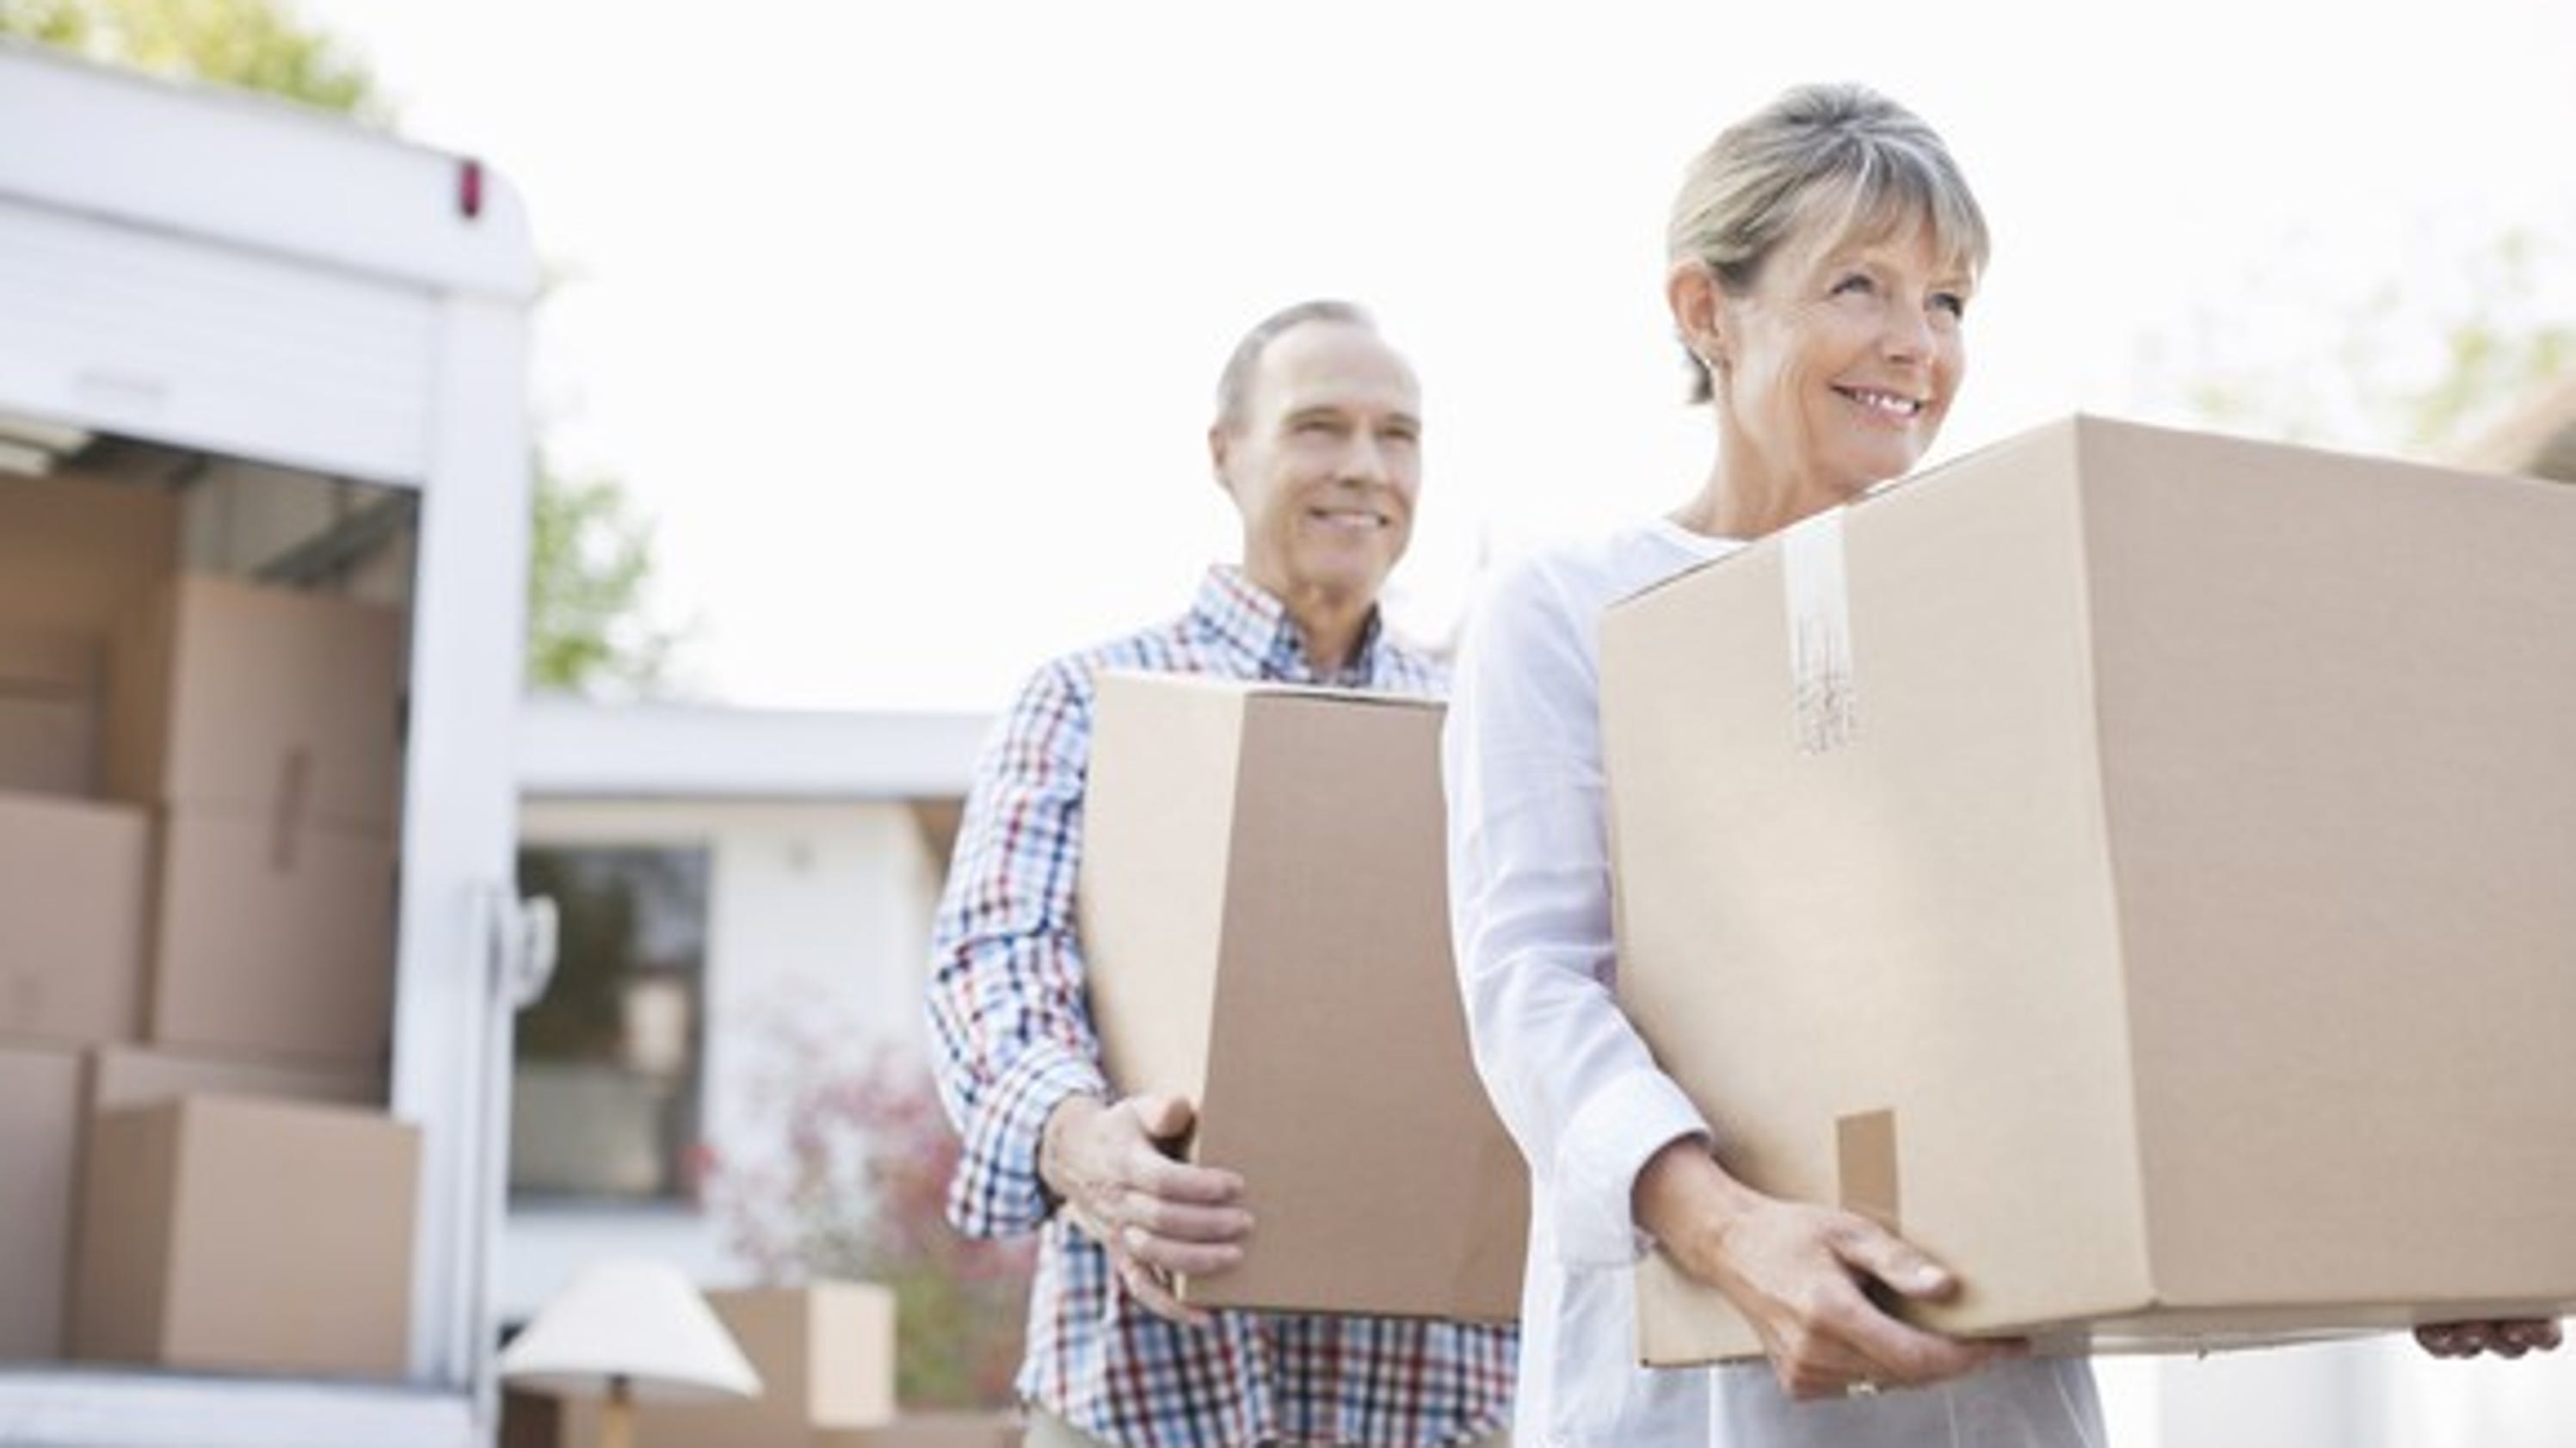 Thinking about buying home in retirement? Here are 3 reasons to rent instead